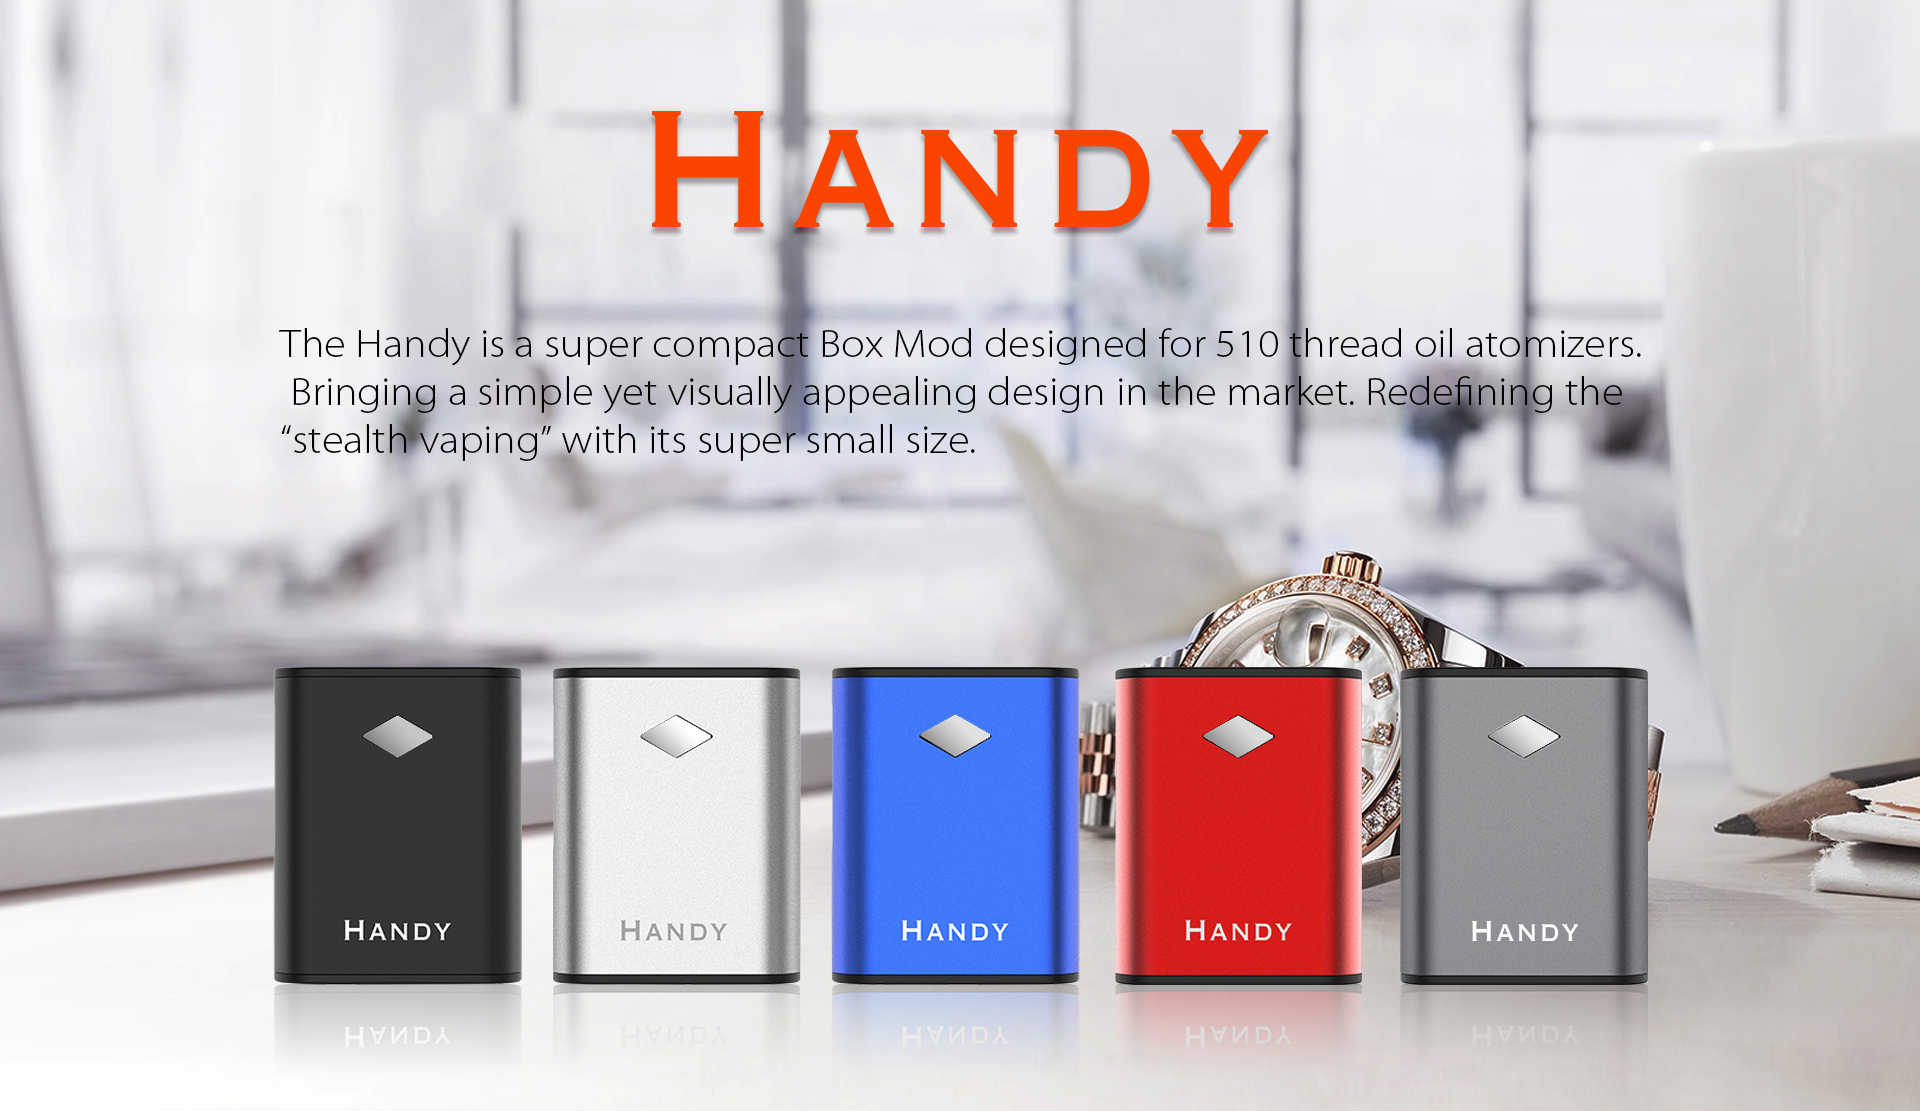 The Handy is a super compact Box Mod designed for 510 thread oil atomizers. Bringing a simple yet visually appealing design in the market. Redefining the “stealth vaping” with its super small size.